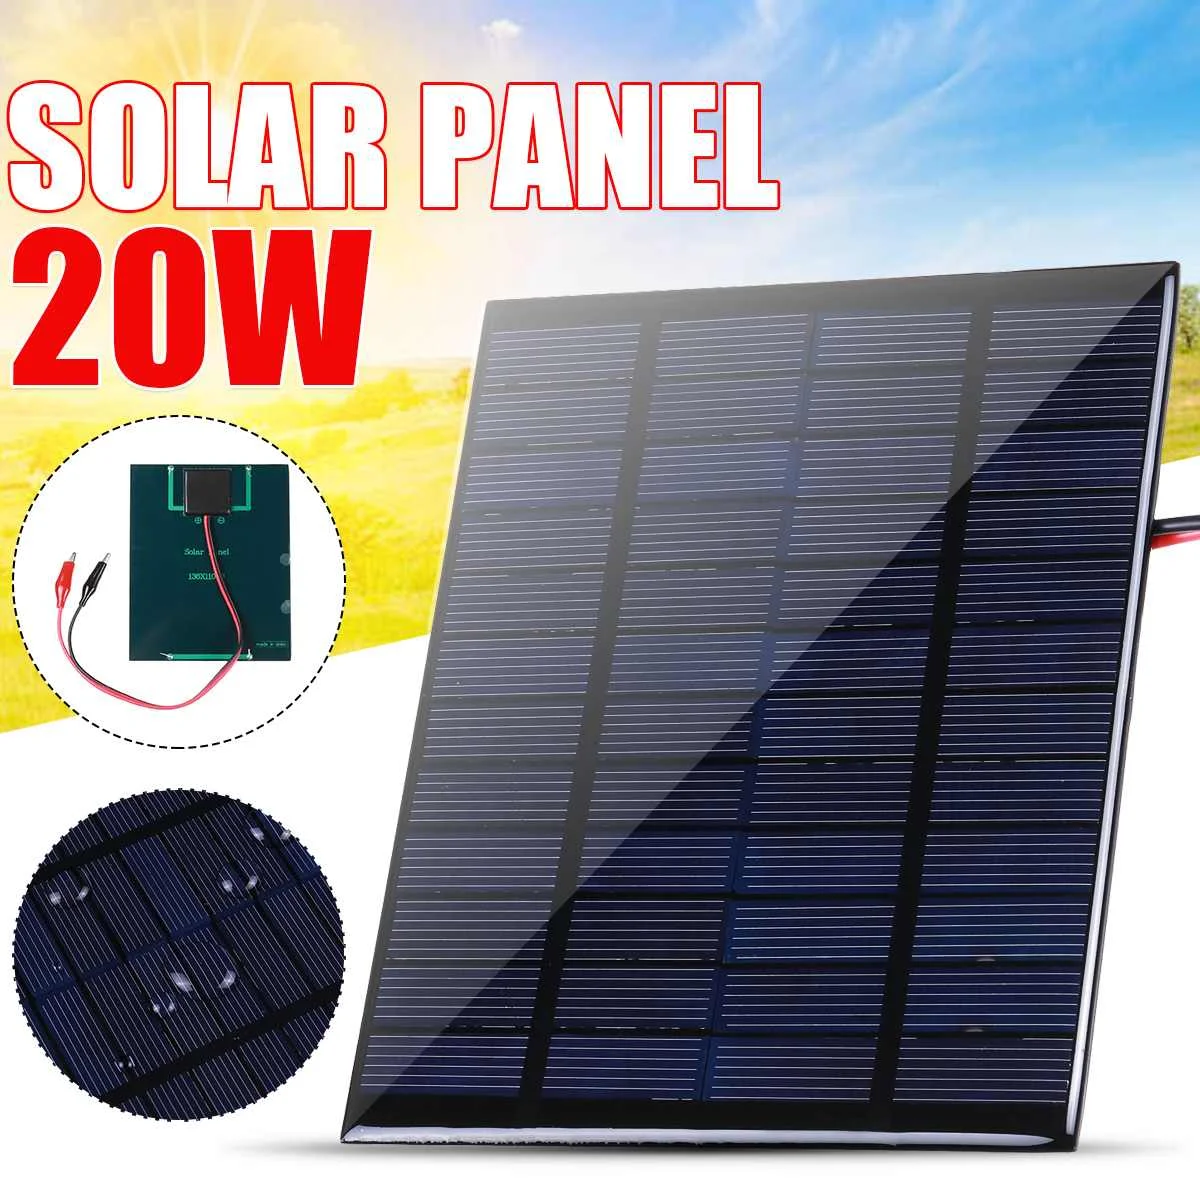 

20W Solar Panel 12V Polycrystalline Silicon Solar Cell DIY Cable Waterproof Outdoor Rechargeable Power System For Lamp Fan Pump